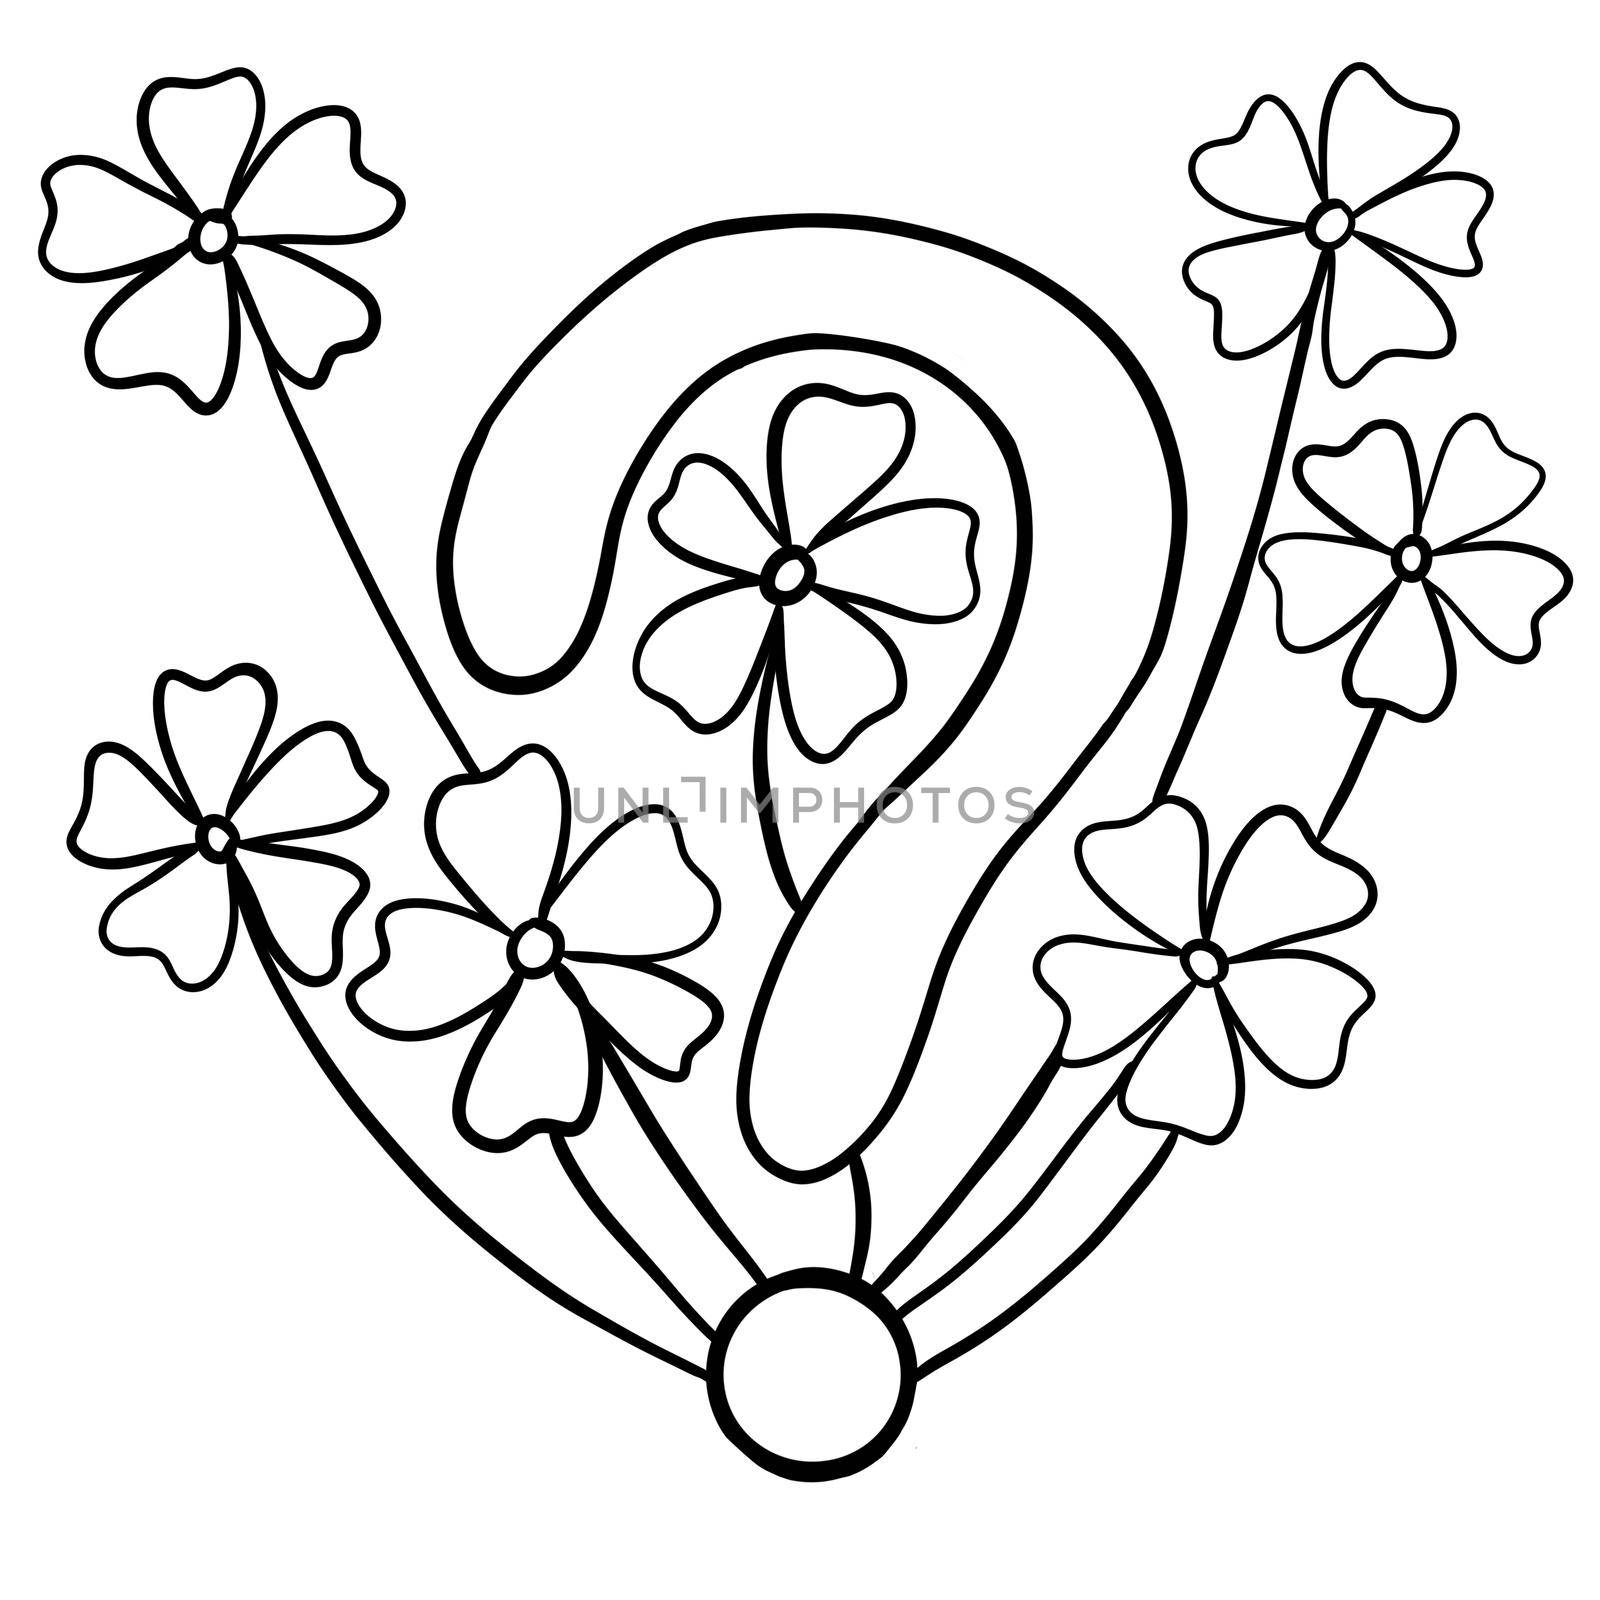 Hand drawn illustration of question mark with leaves flowers nature elements. Why concept for ecology environment environmental causes. Simple minimalist design with black line outline silhouette, spring summer print. by Lagmar